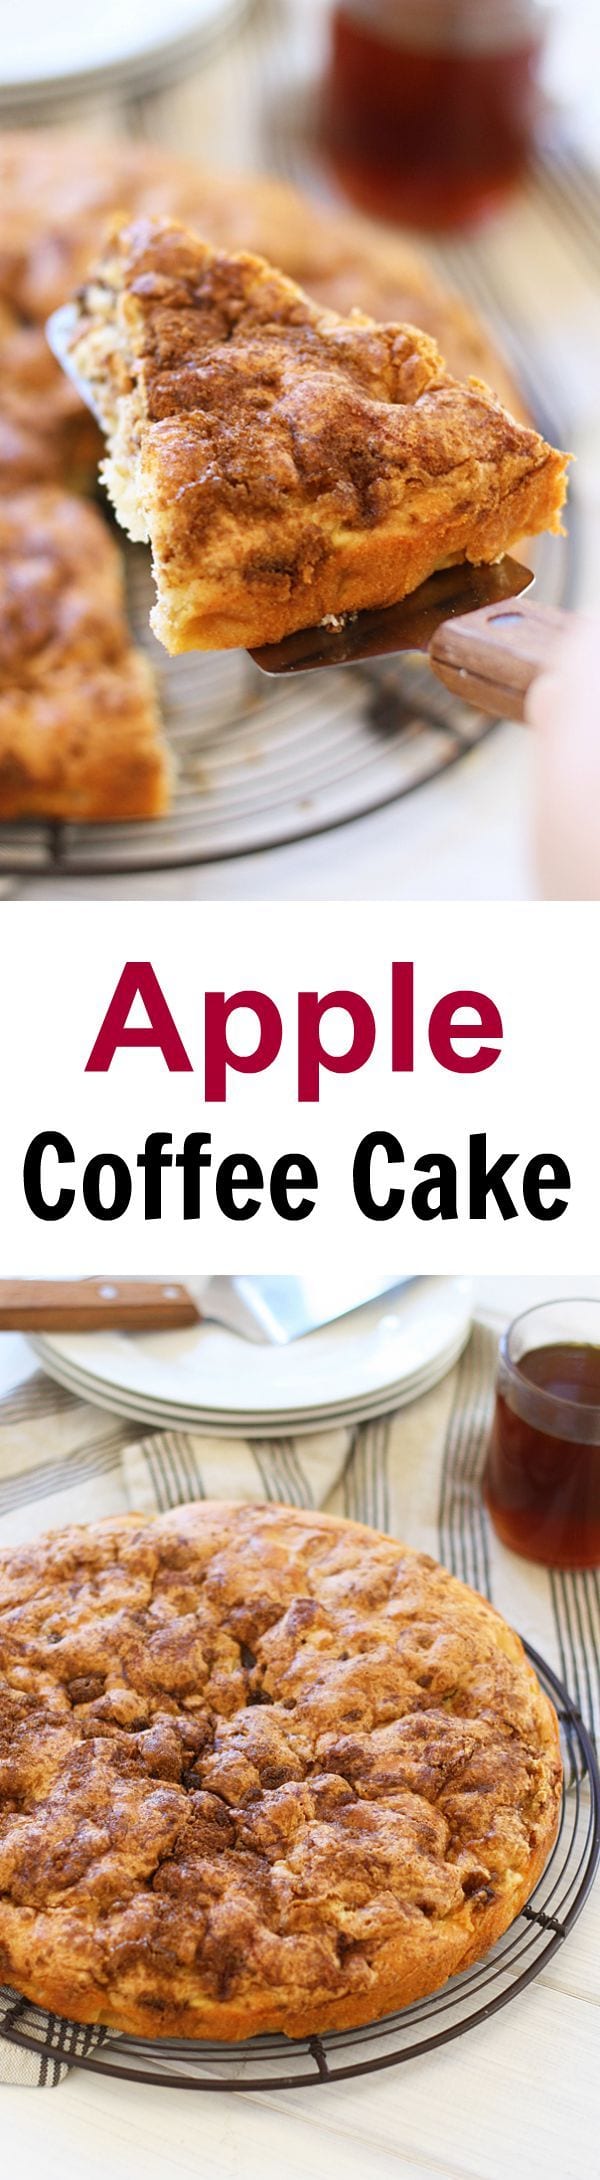 Apple Coffee Cake – sweet and decadent coffee cake loaded with apple, this cake is super easy to bake and perfect with tea or coffee | rasamalaysia.com